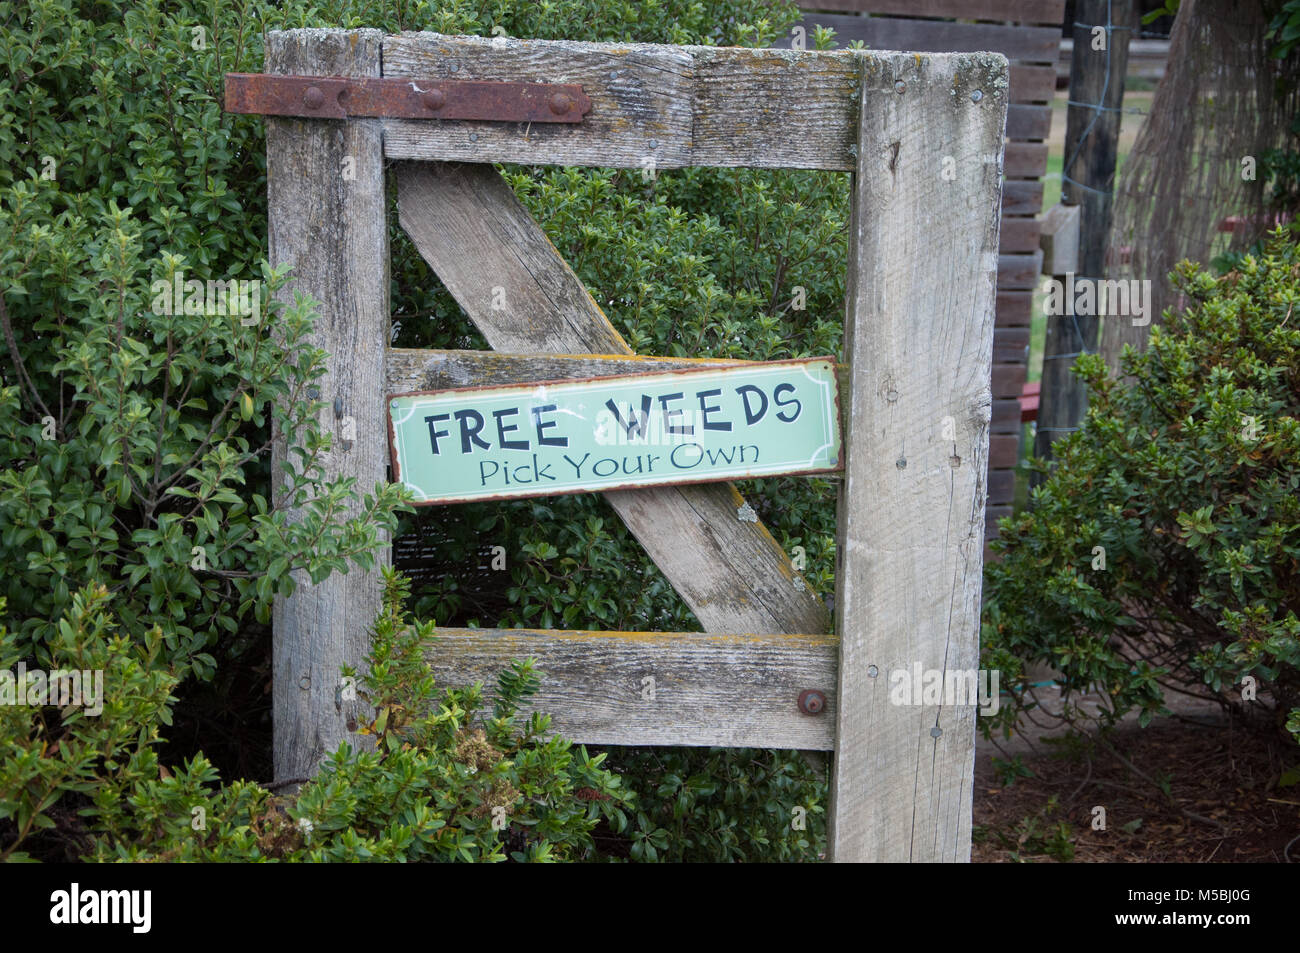 Free Weeds Pick Your Own Stock Photo